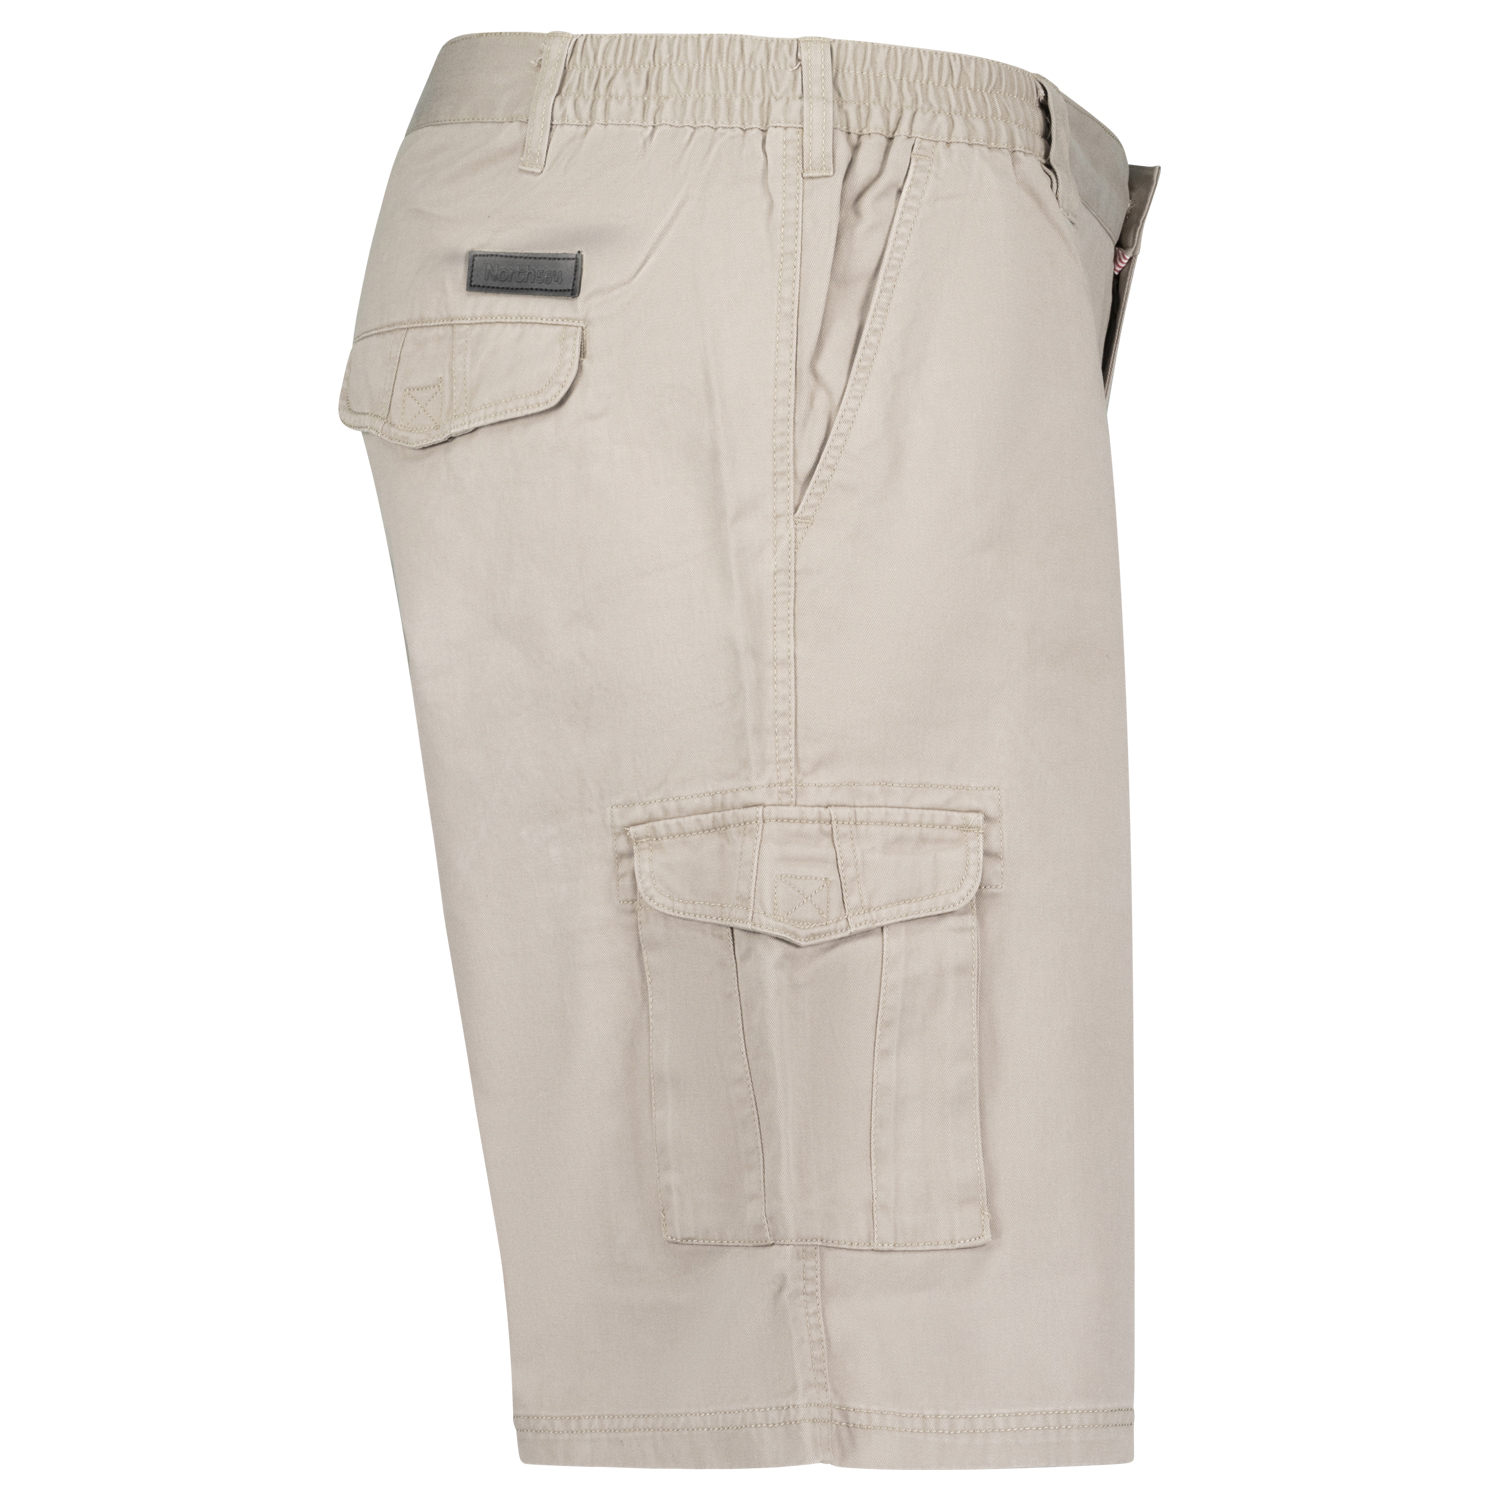 Cargo shorts by North 56°4 up to oversize 8XL / sand-colored